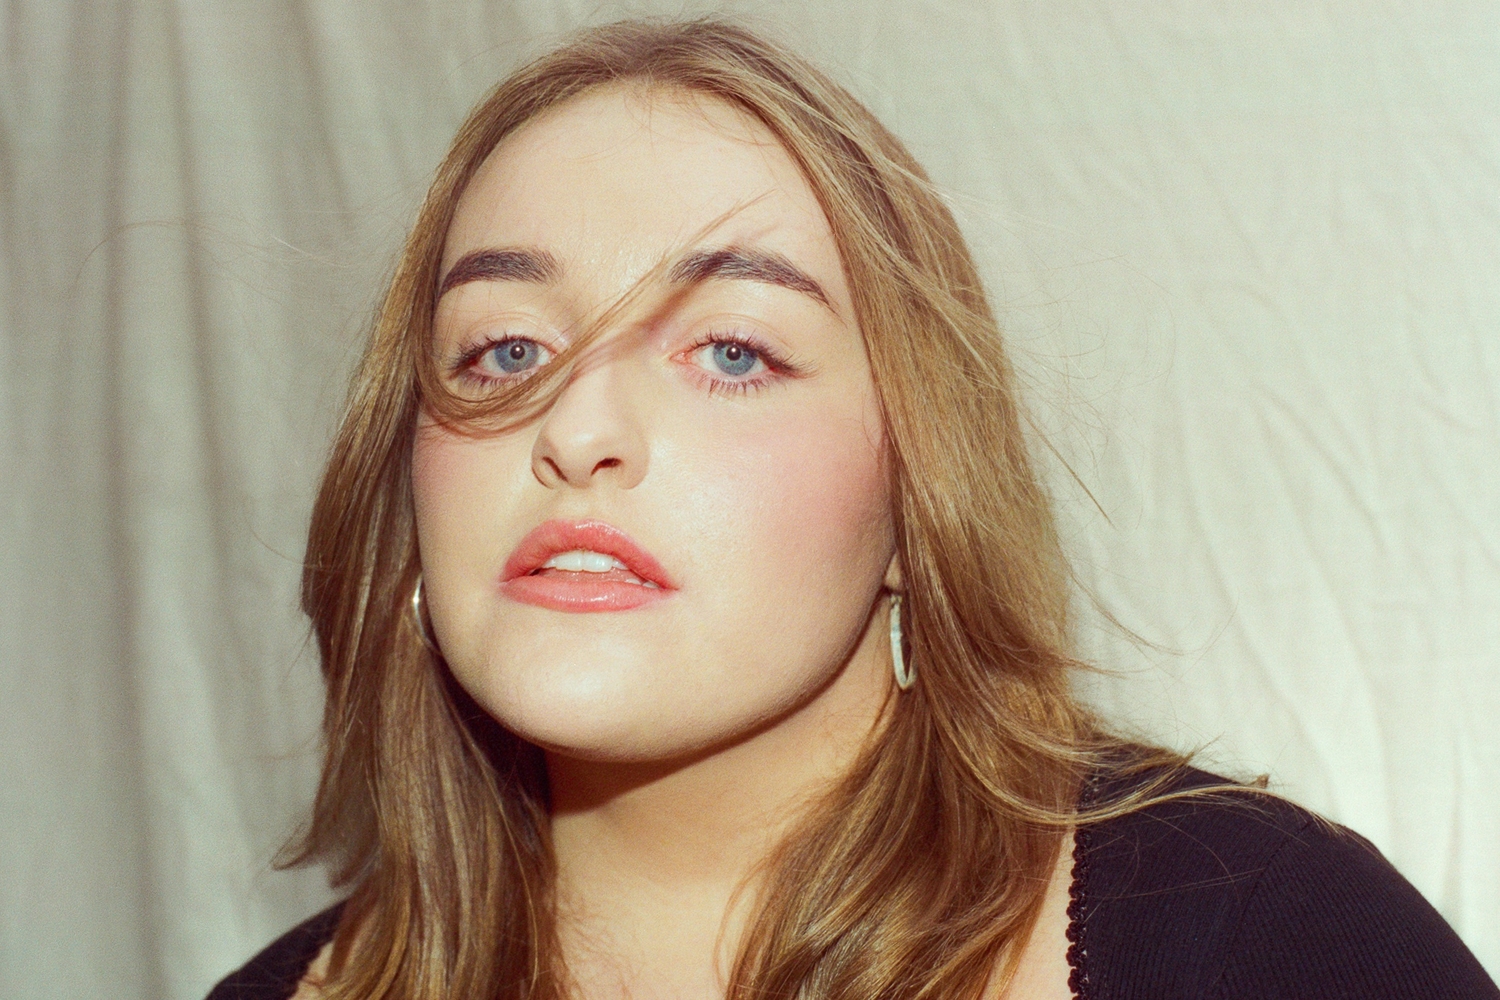 Nell Mescal releases new single ‘Warm Body’ ahead of her debut EP ‘Can I Miss It For A Minute?’